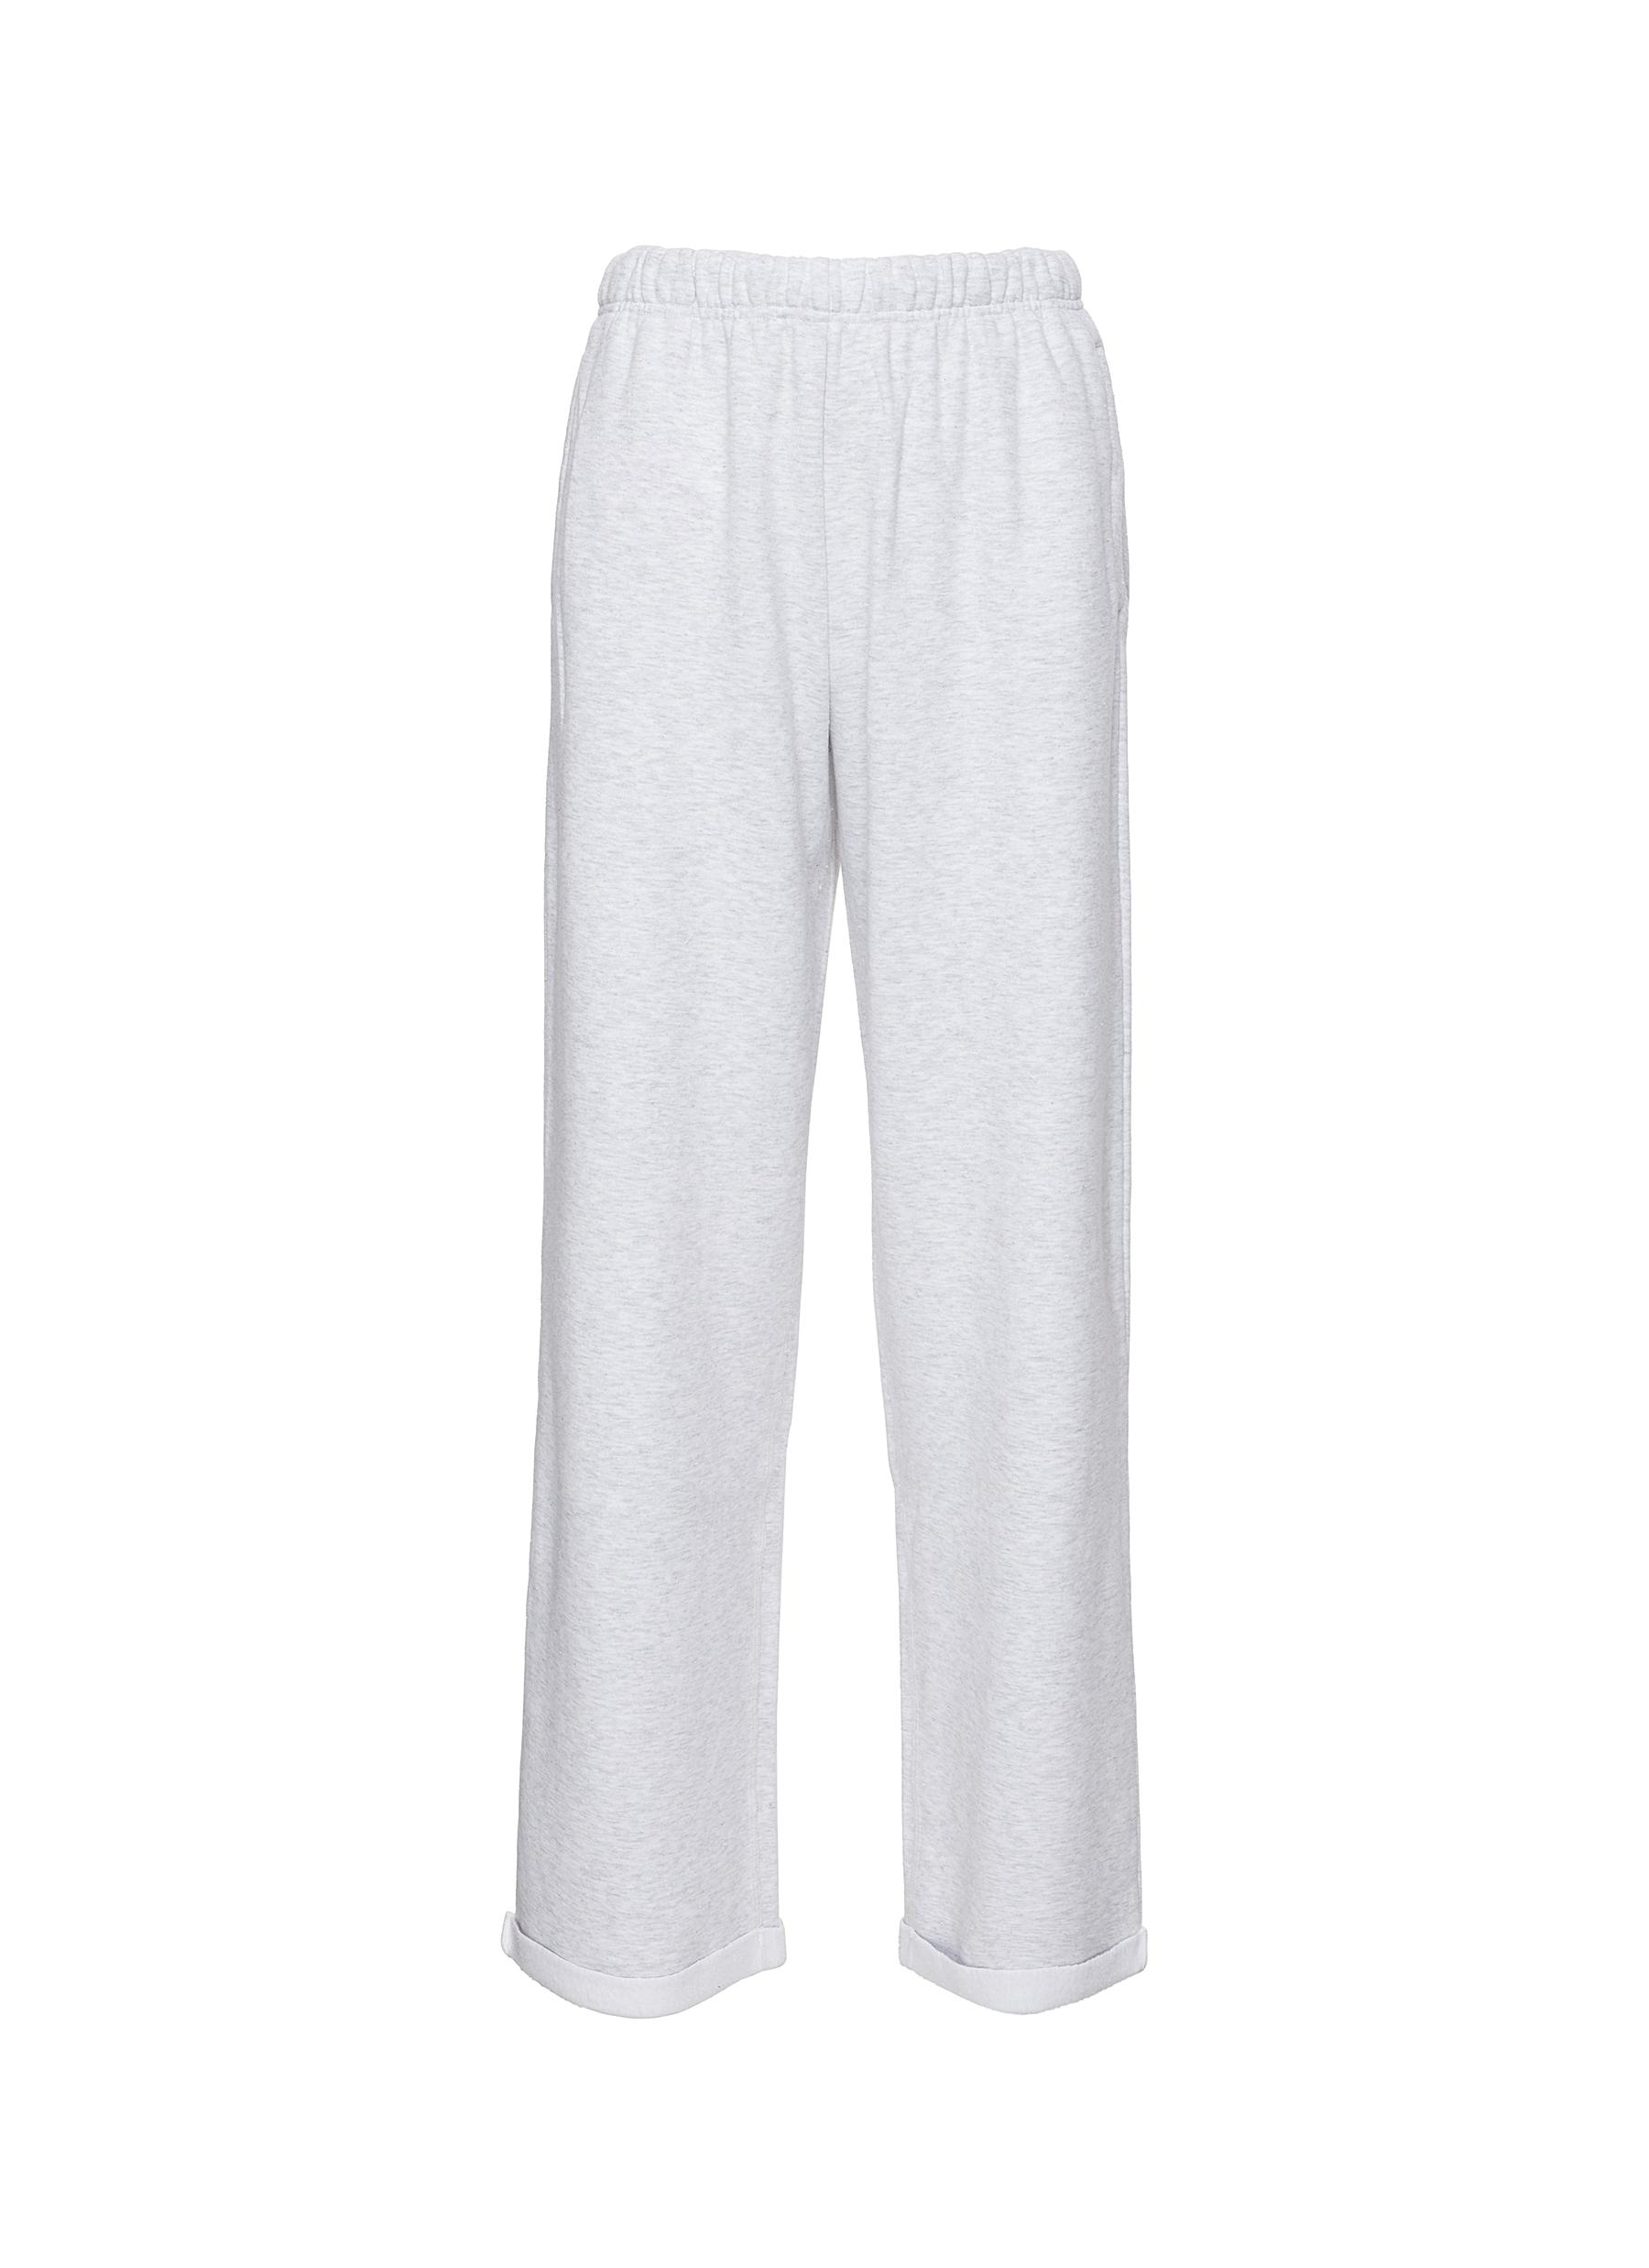 Skims Restock Alerts on X: 🛎️ IN STOCK ALERT 🛎️ Cotton Fleece Classic  Straight Leg Pant - Light Heather Grey - S is in stock at Skims for $72.00   #skims As